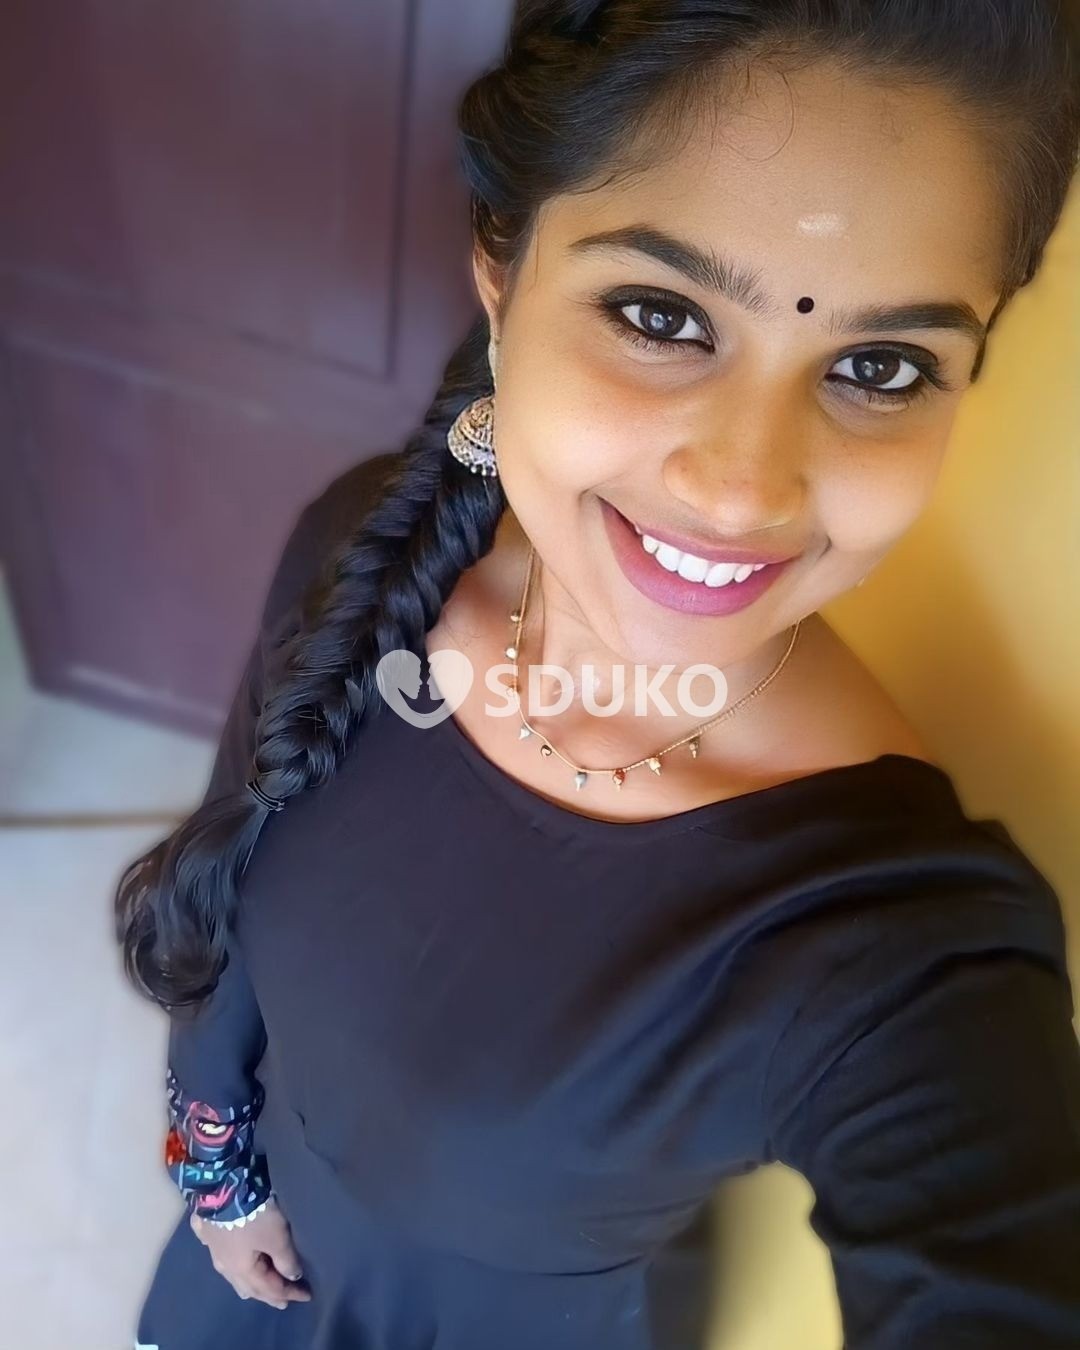 Adyar BEST, 💯 SAFE AND, GENINUE VIP LOW BUDGET CALL GIRL CALL 24 ×7 available